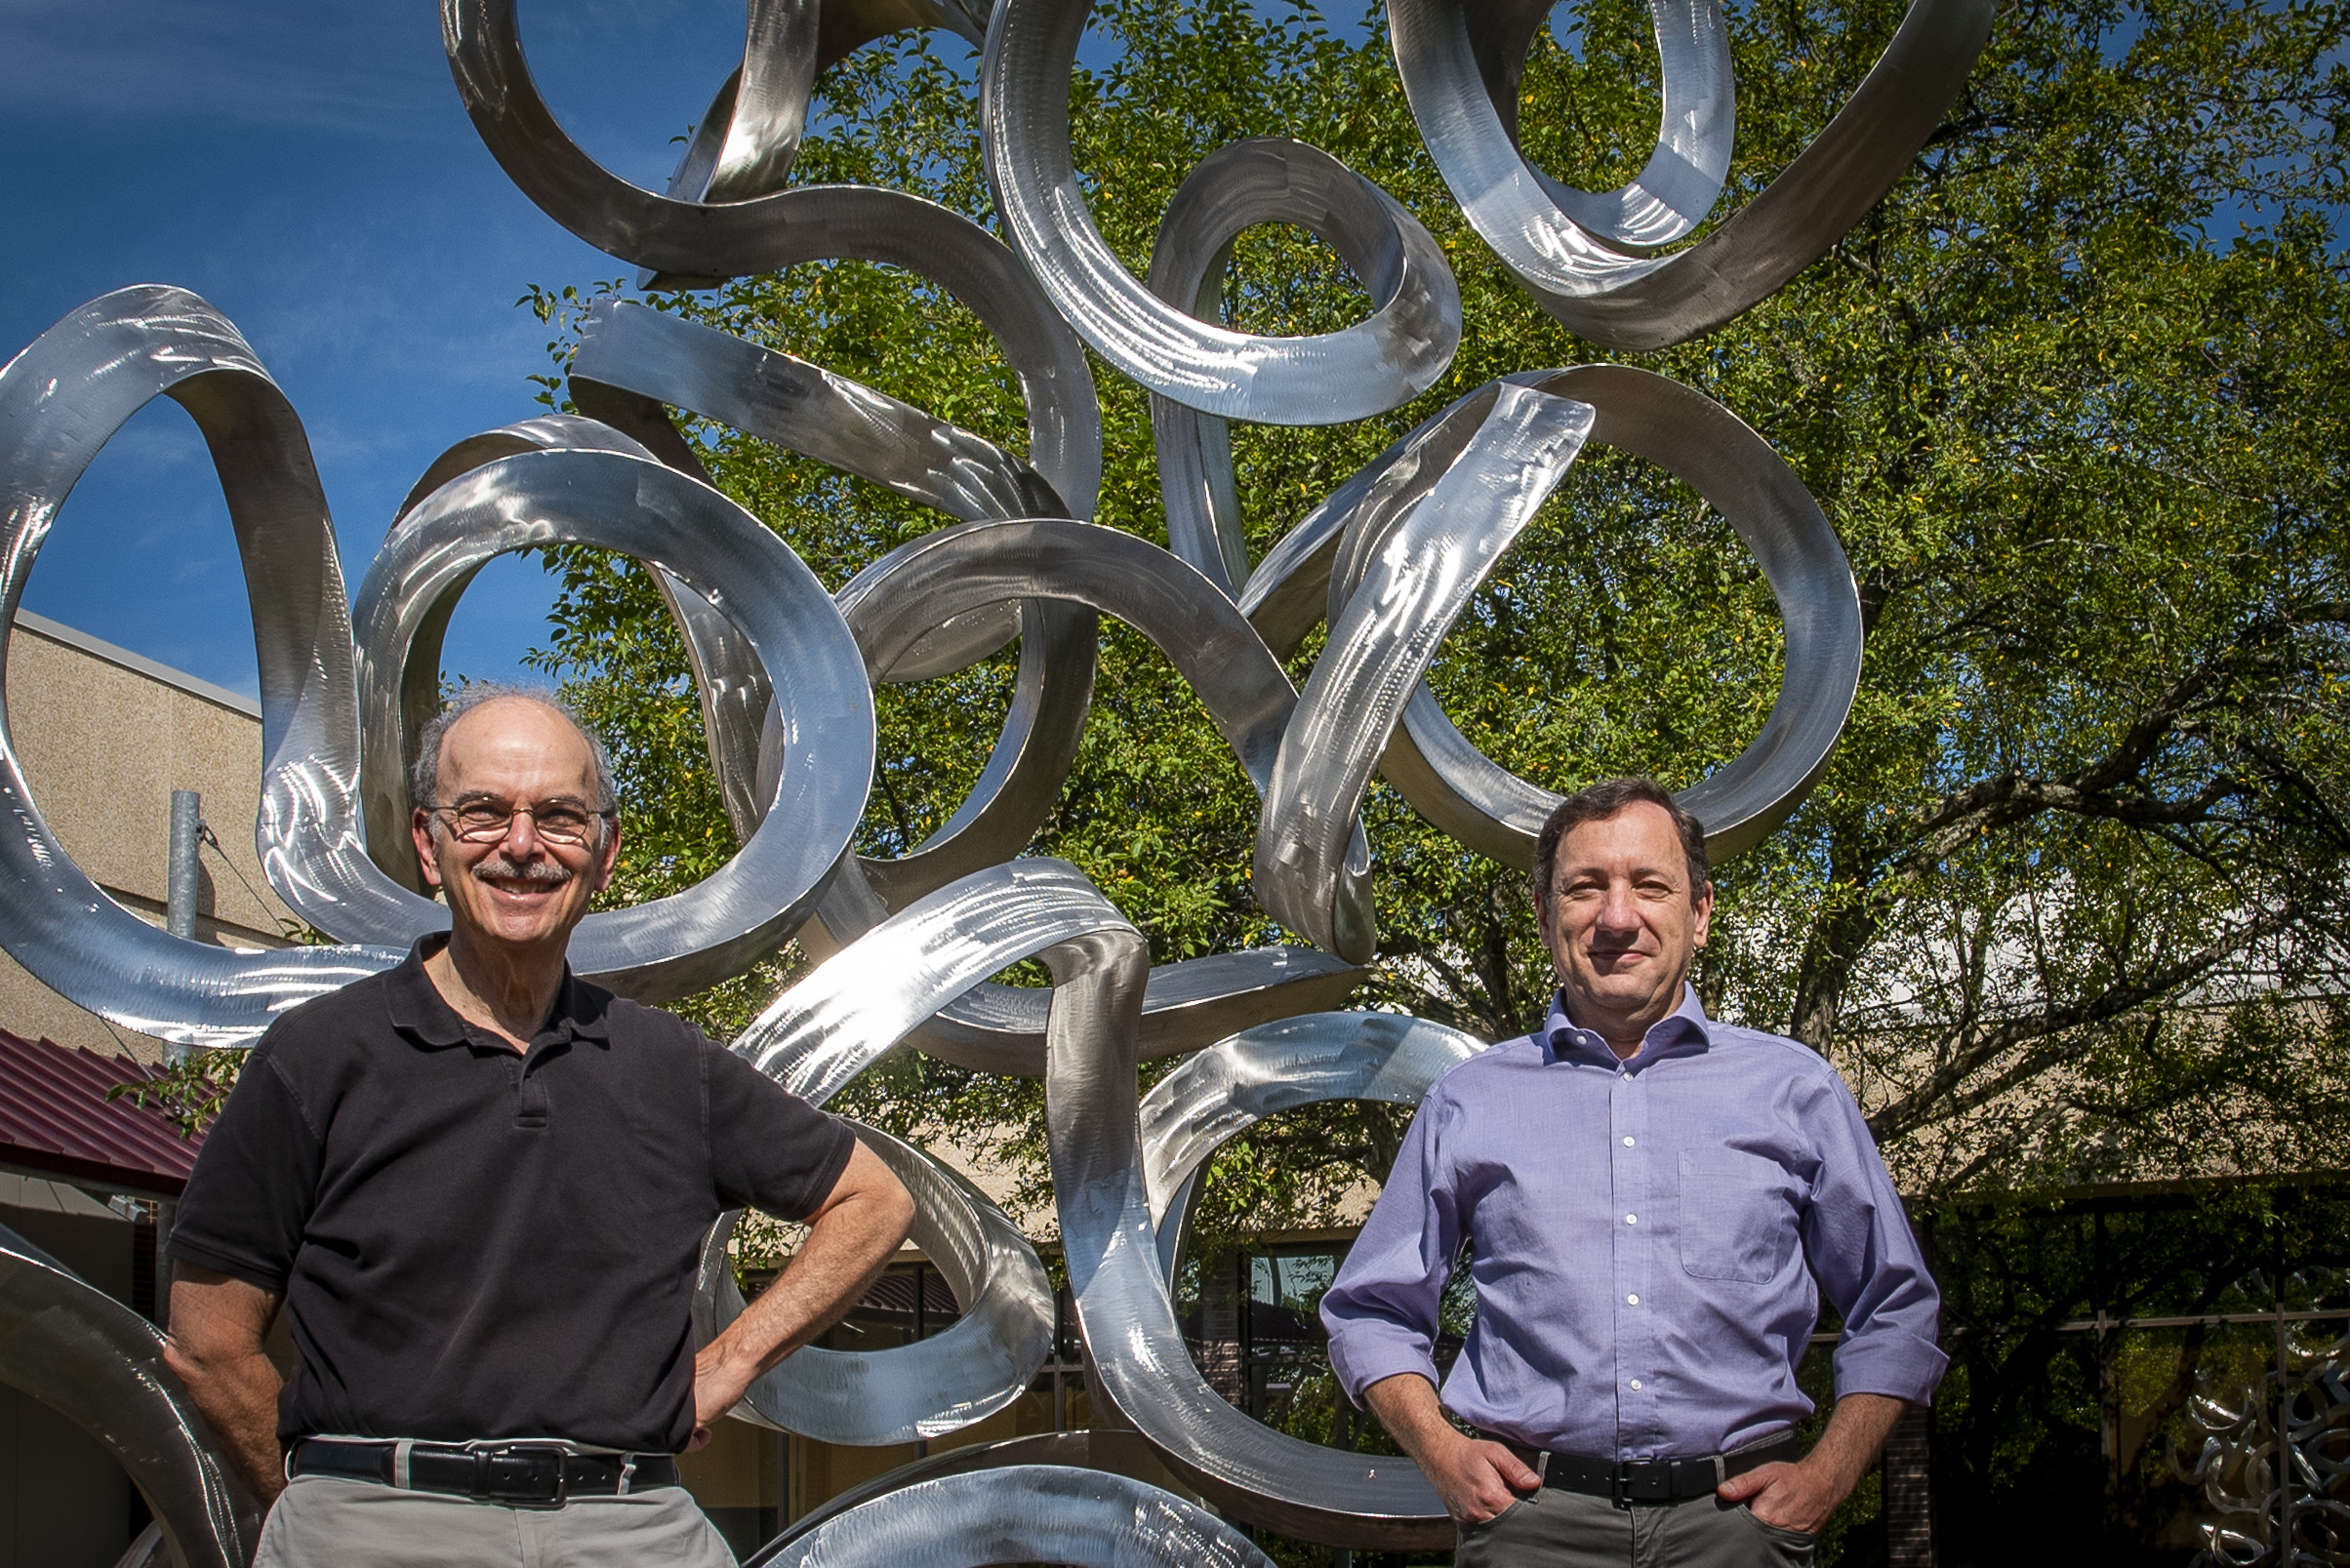 Researchers Les Loew, left, and Pedro Mendes outside the Cell and Genome building at UConn Health in Farmington on July 13, 2020.